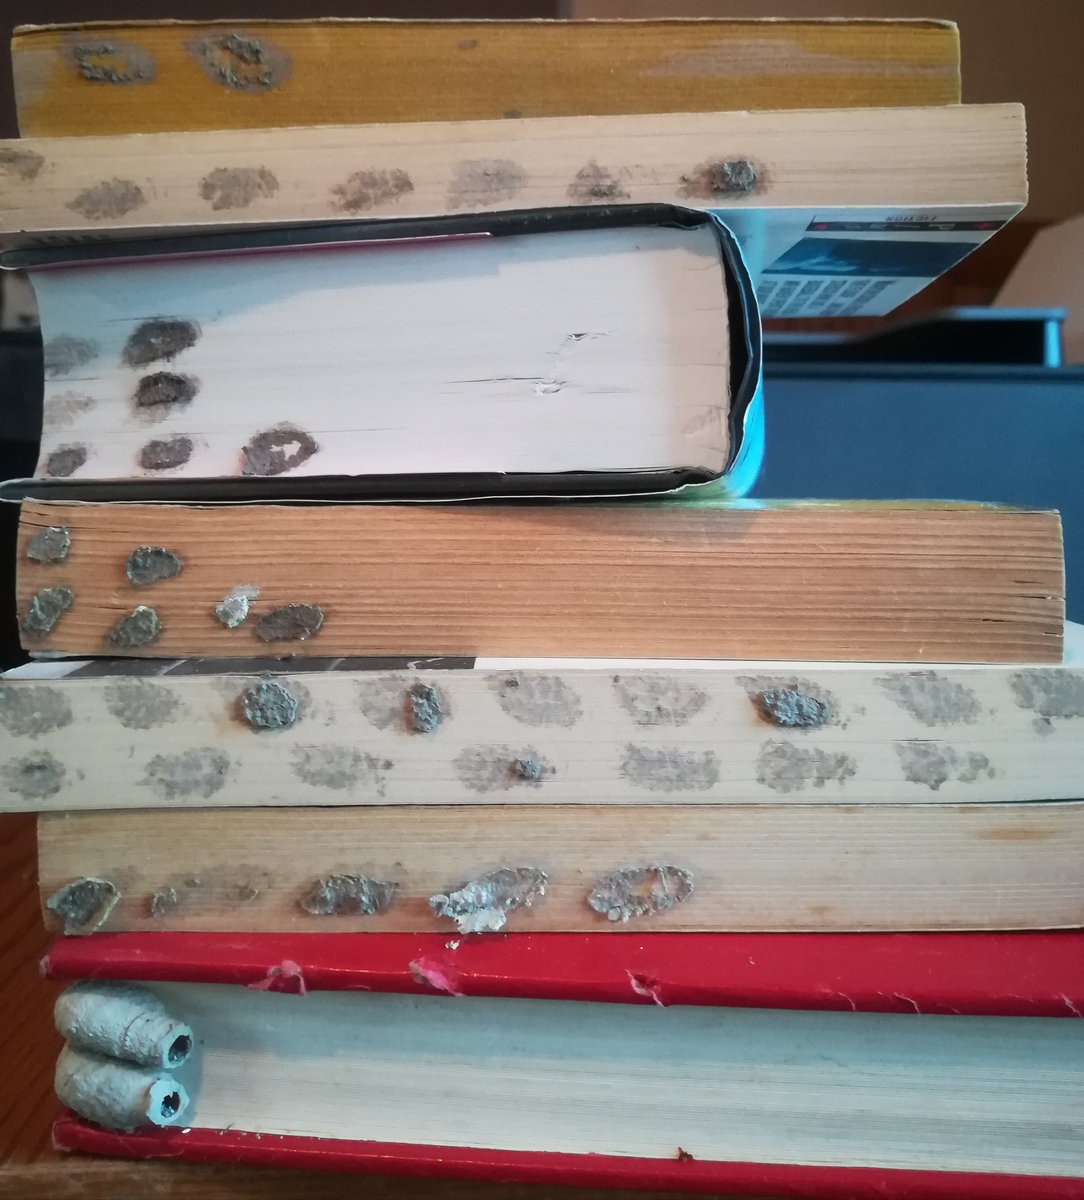 For those asking: the wasps made v broad book choices including Angela Carter, Elizabeth Bowen,  @MargaretAtwood  @Joannechocolat &  @HarrietEvans. The mud nests left little marks on the edges of the books when I removed them & some had old larvae inside.